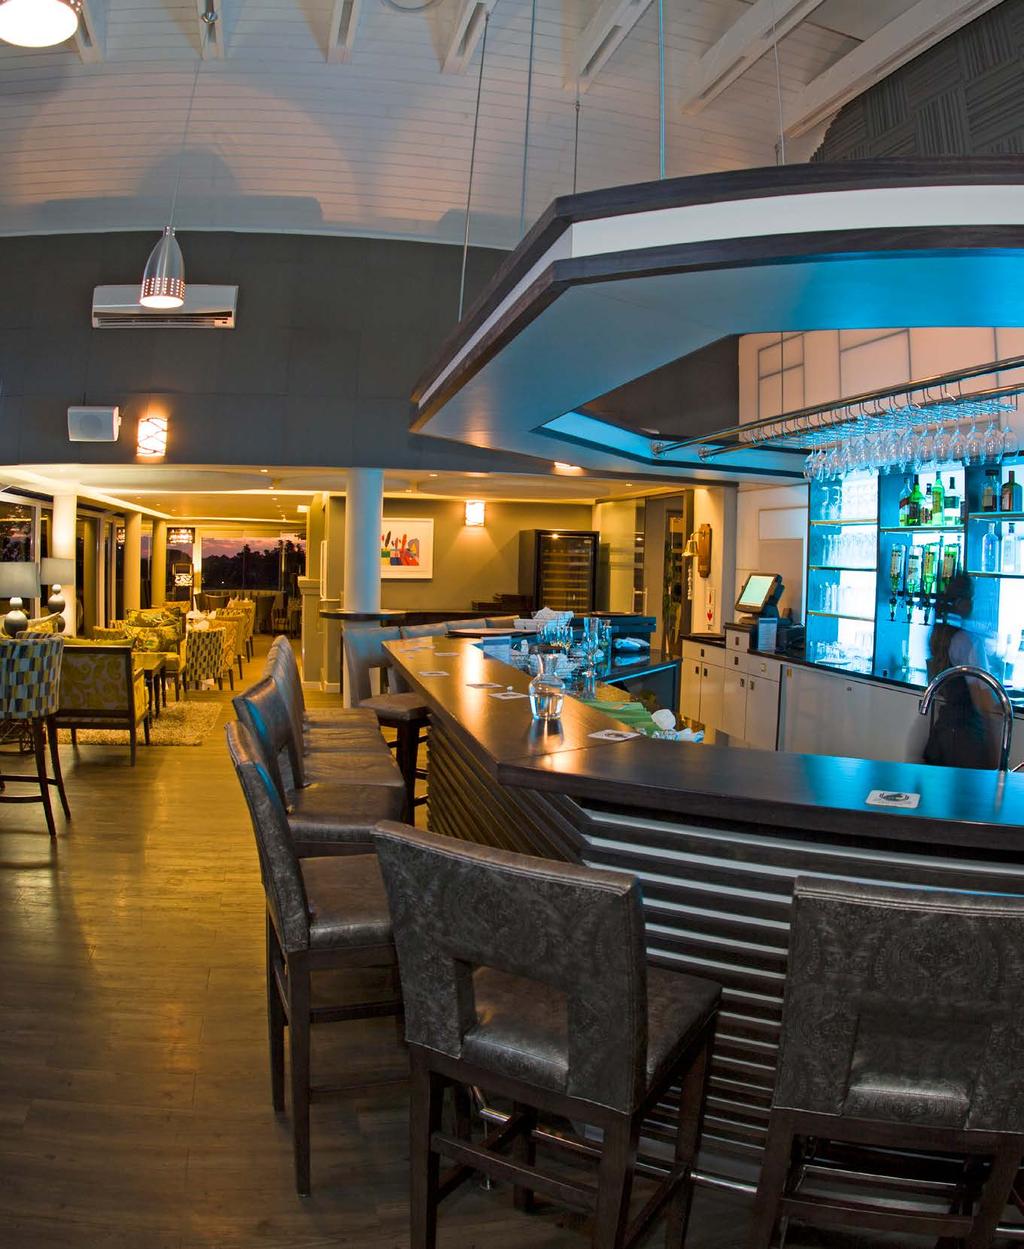 THE PLAYAS BAR & RESTAURANT The Playas Bar and Restaurant offers a tranquil environment to soak in the splendor overseeing the Gary Player designed Championship Golf Course, with large windows and a